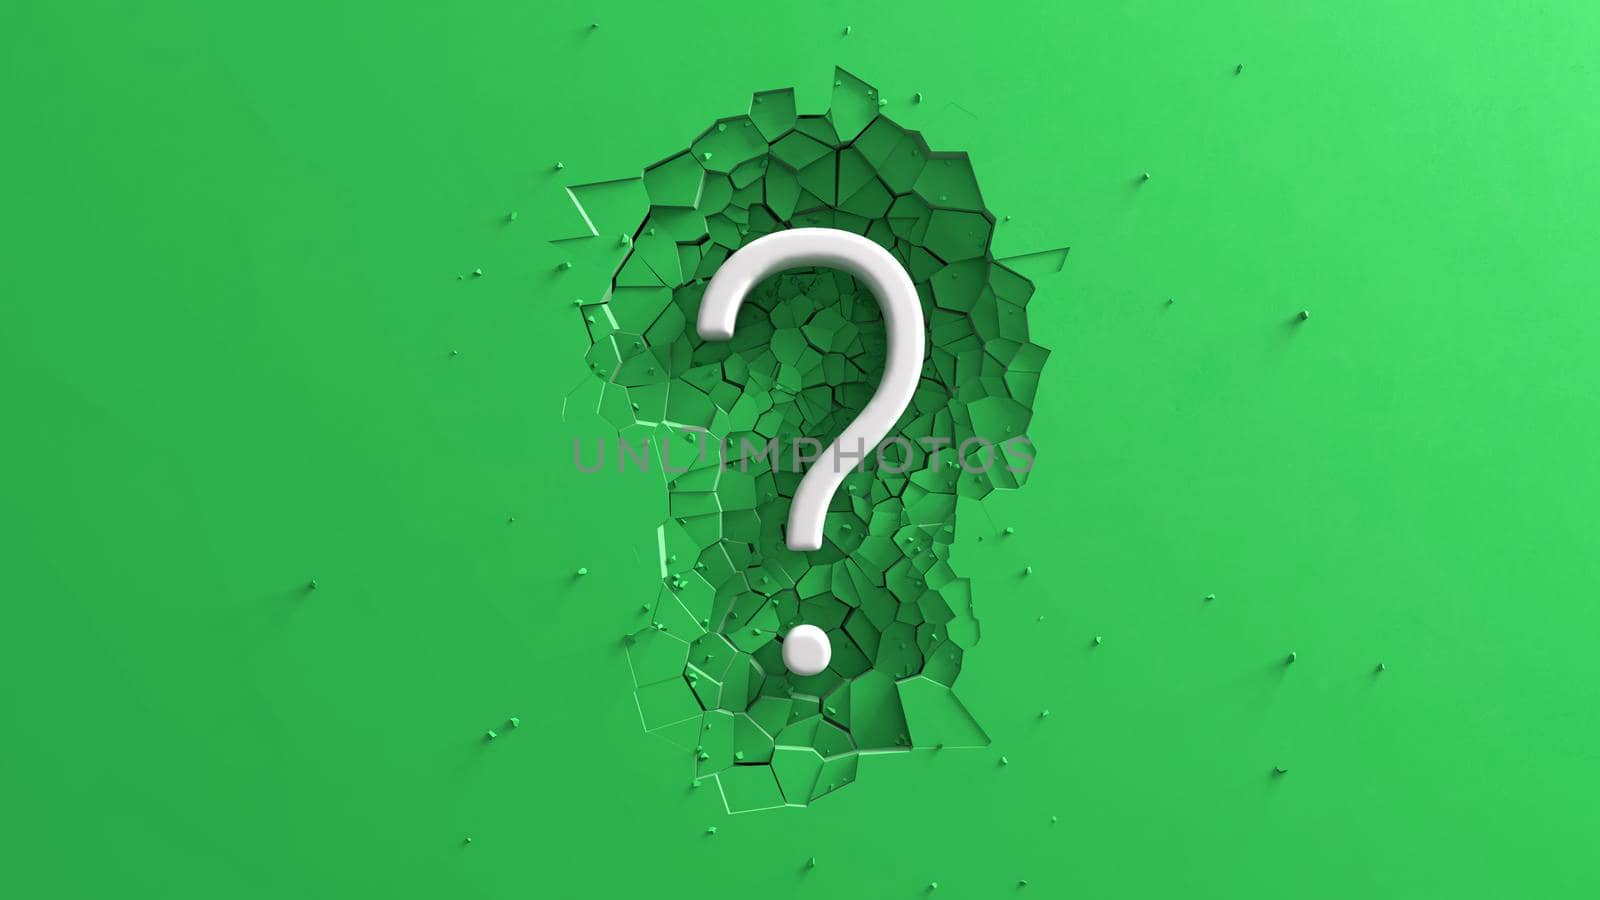 Large White Question mark symbol on Green background with impact effect breaking floor 3D render.